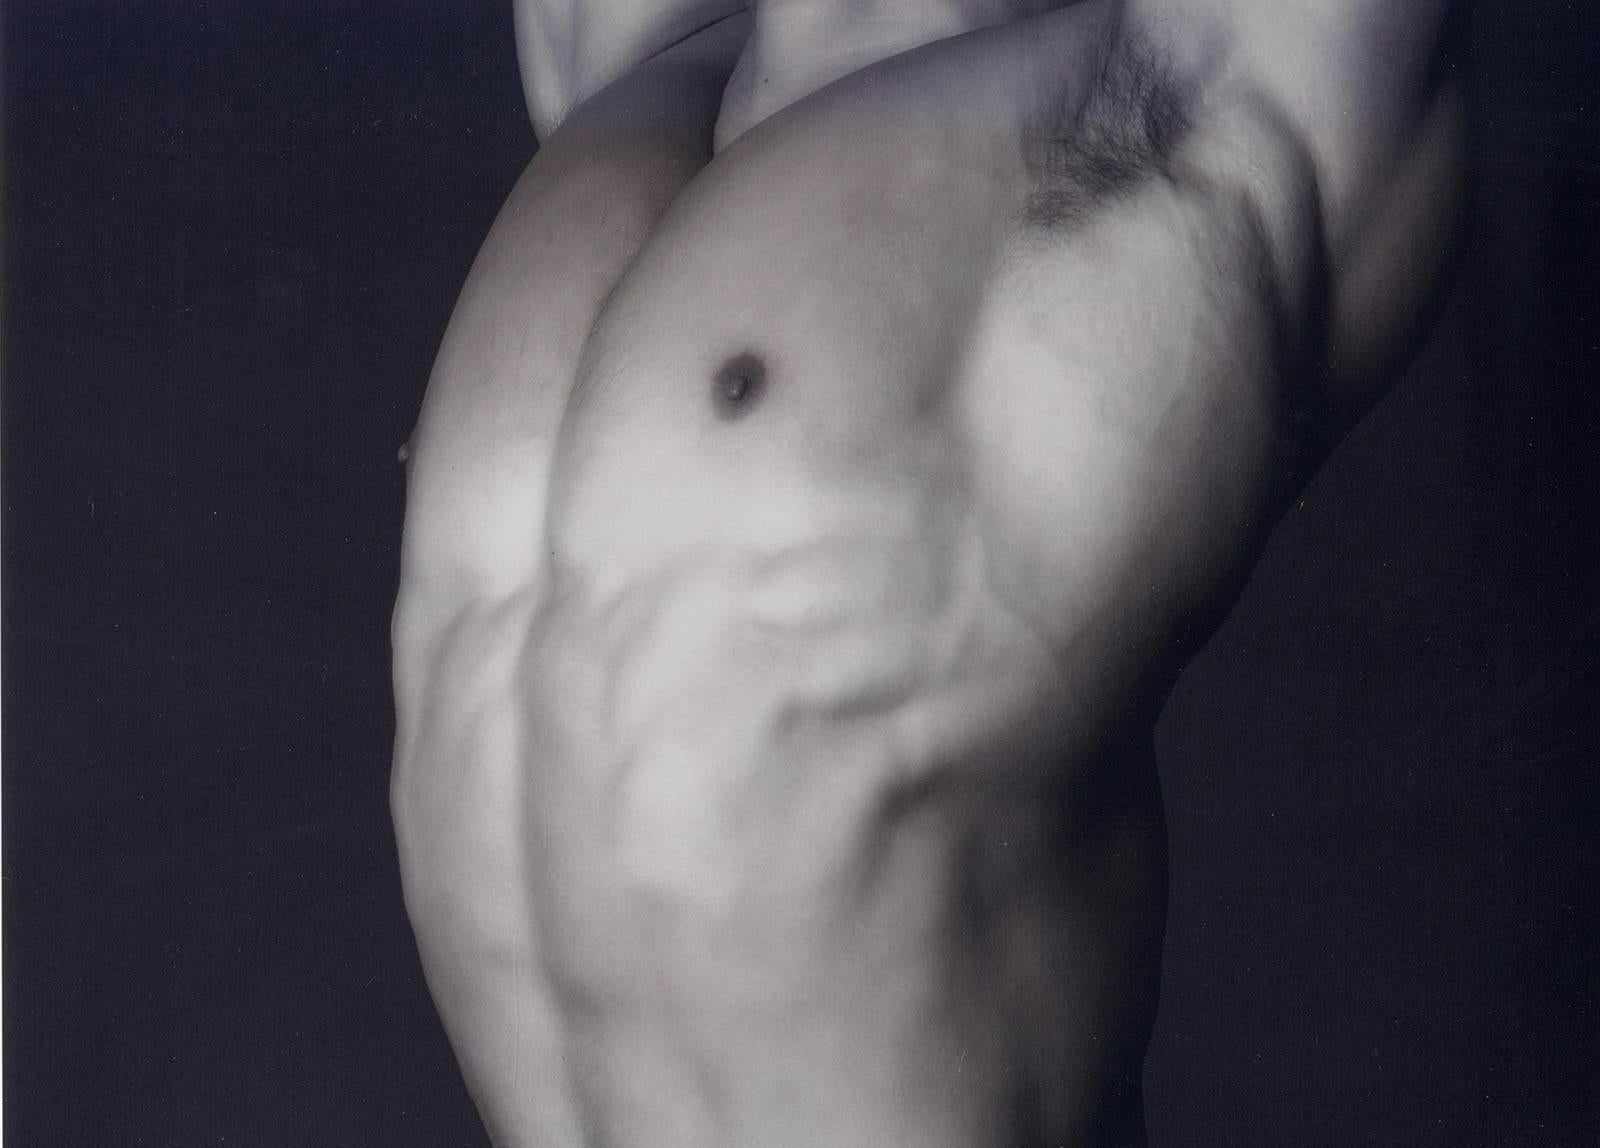 Male Nude #3 - Photograph by Dylan Ricci